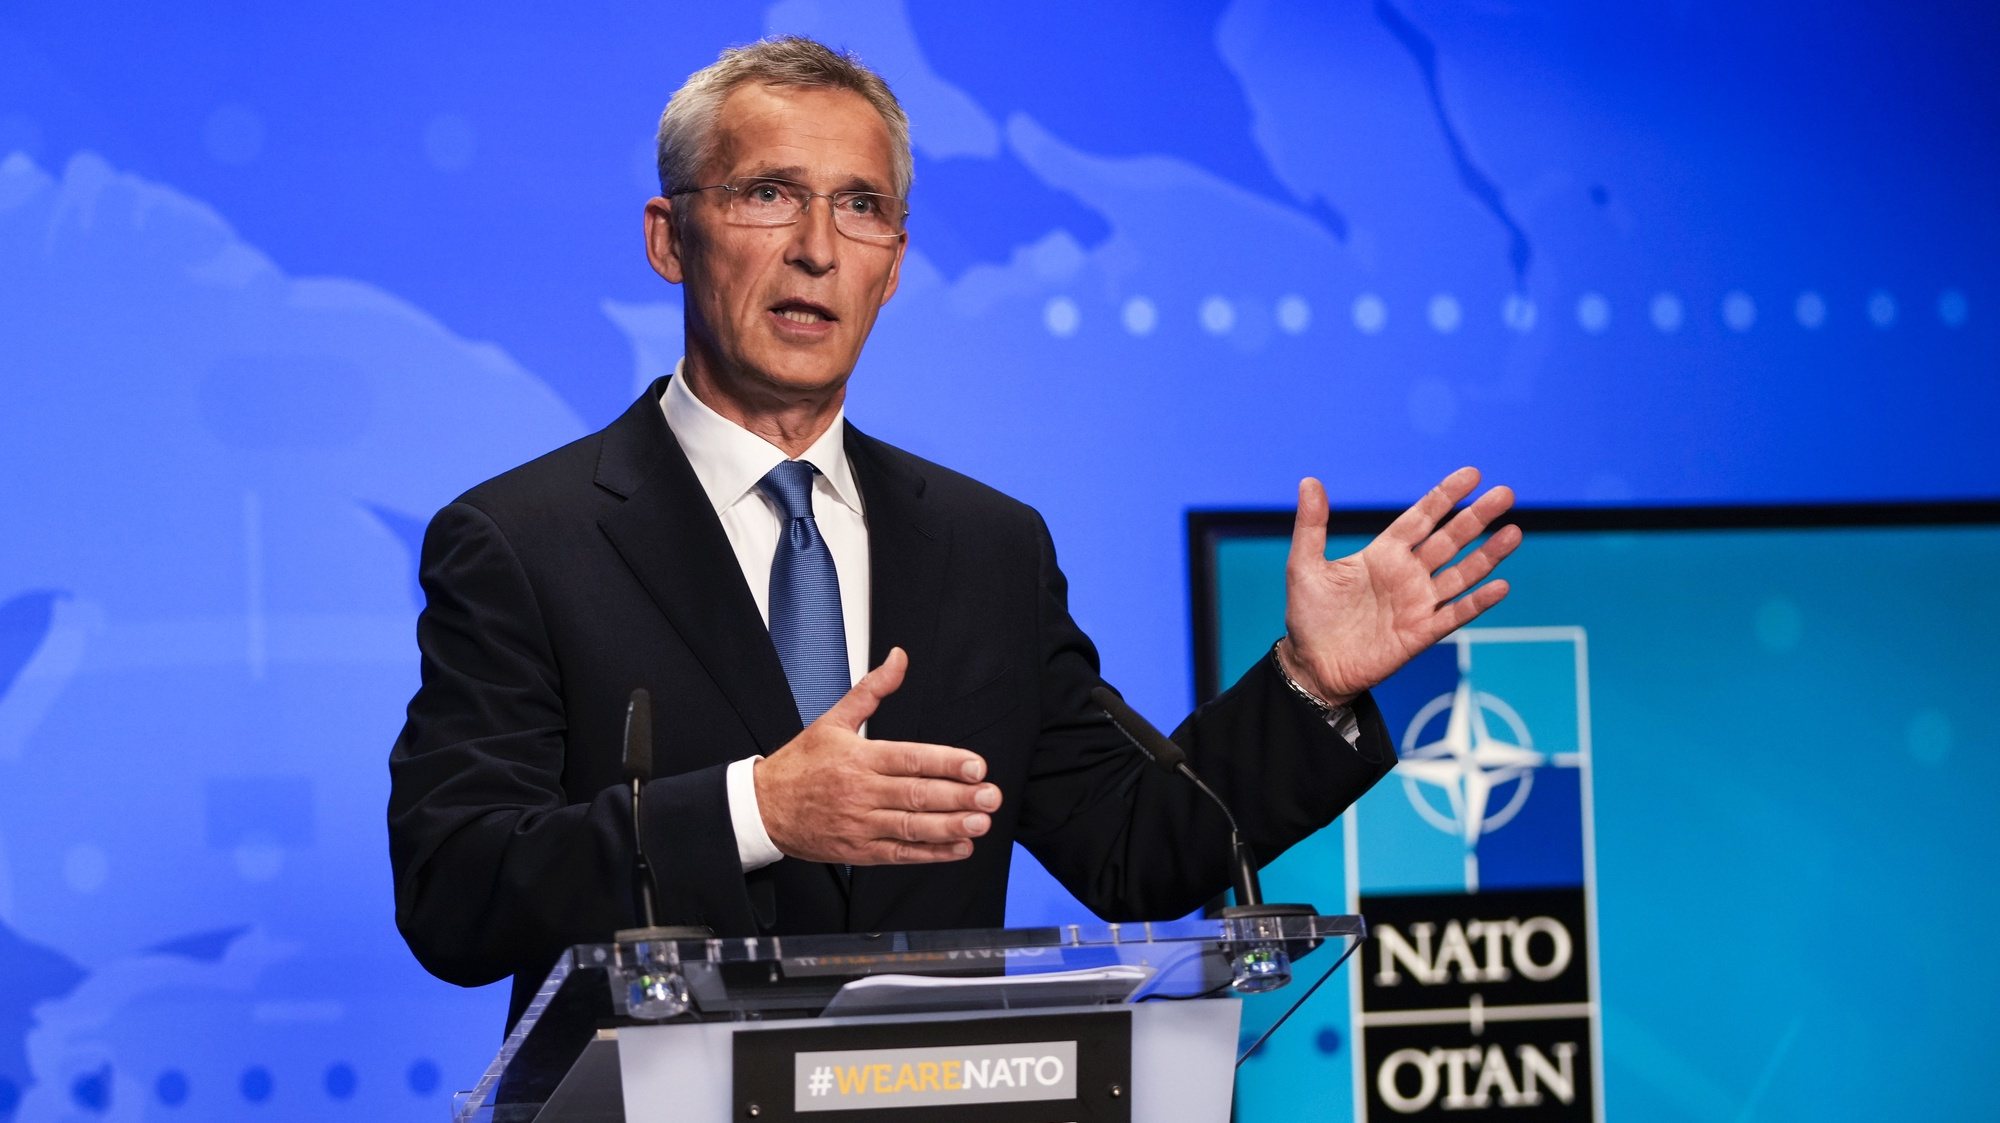 epa09422095 NATO Secretary General Jens Stoltenberg gestures during an online news conference following a NATO Foreign Ministers video meeting following developments in Afghanistan at the NATO headquarters in Brussels, Belgium, 20 August 2021.  EPA/FRANCISCO SECO / POOL